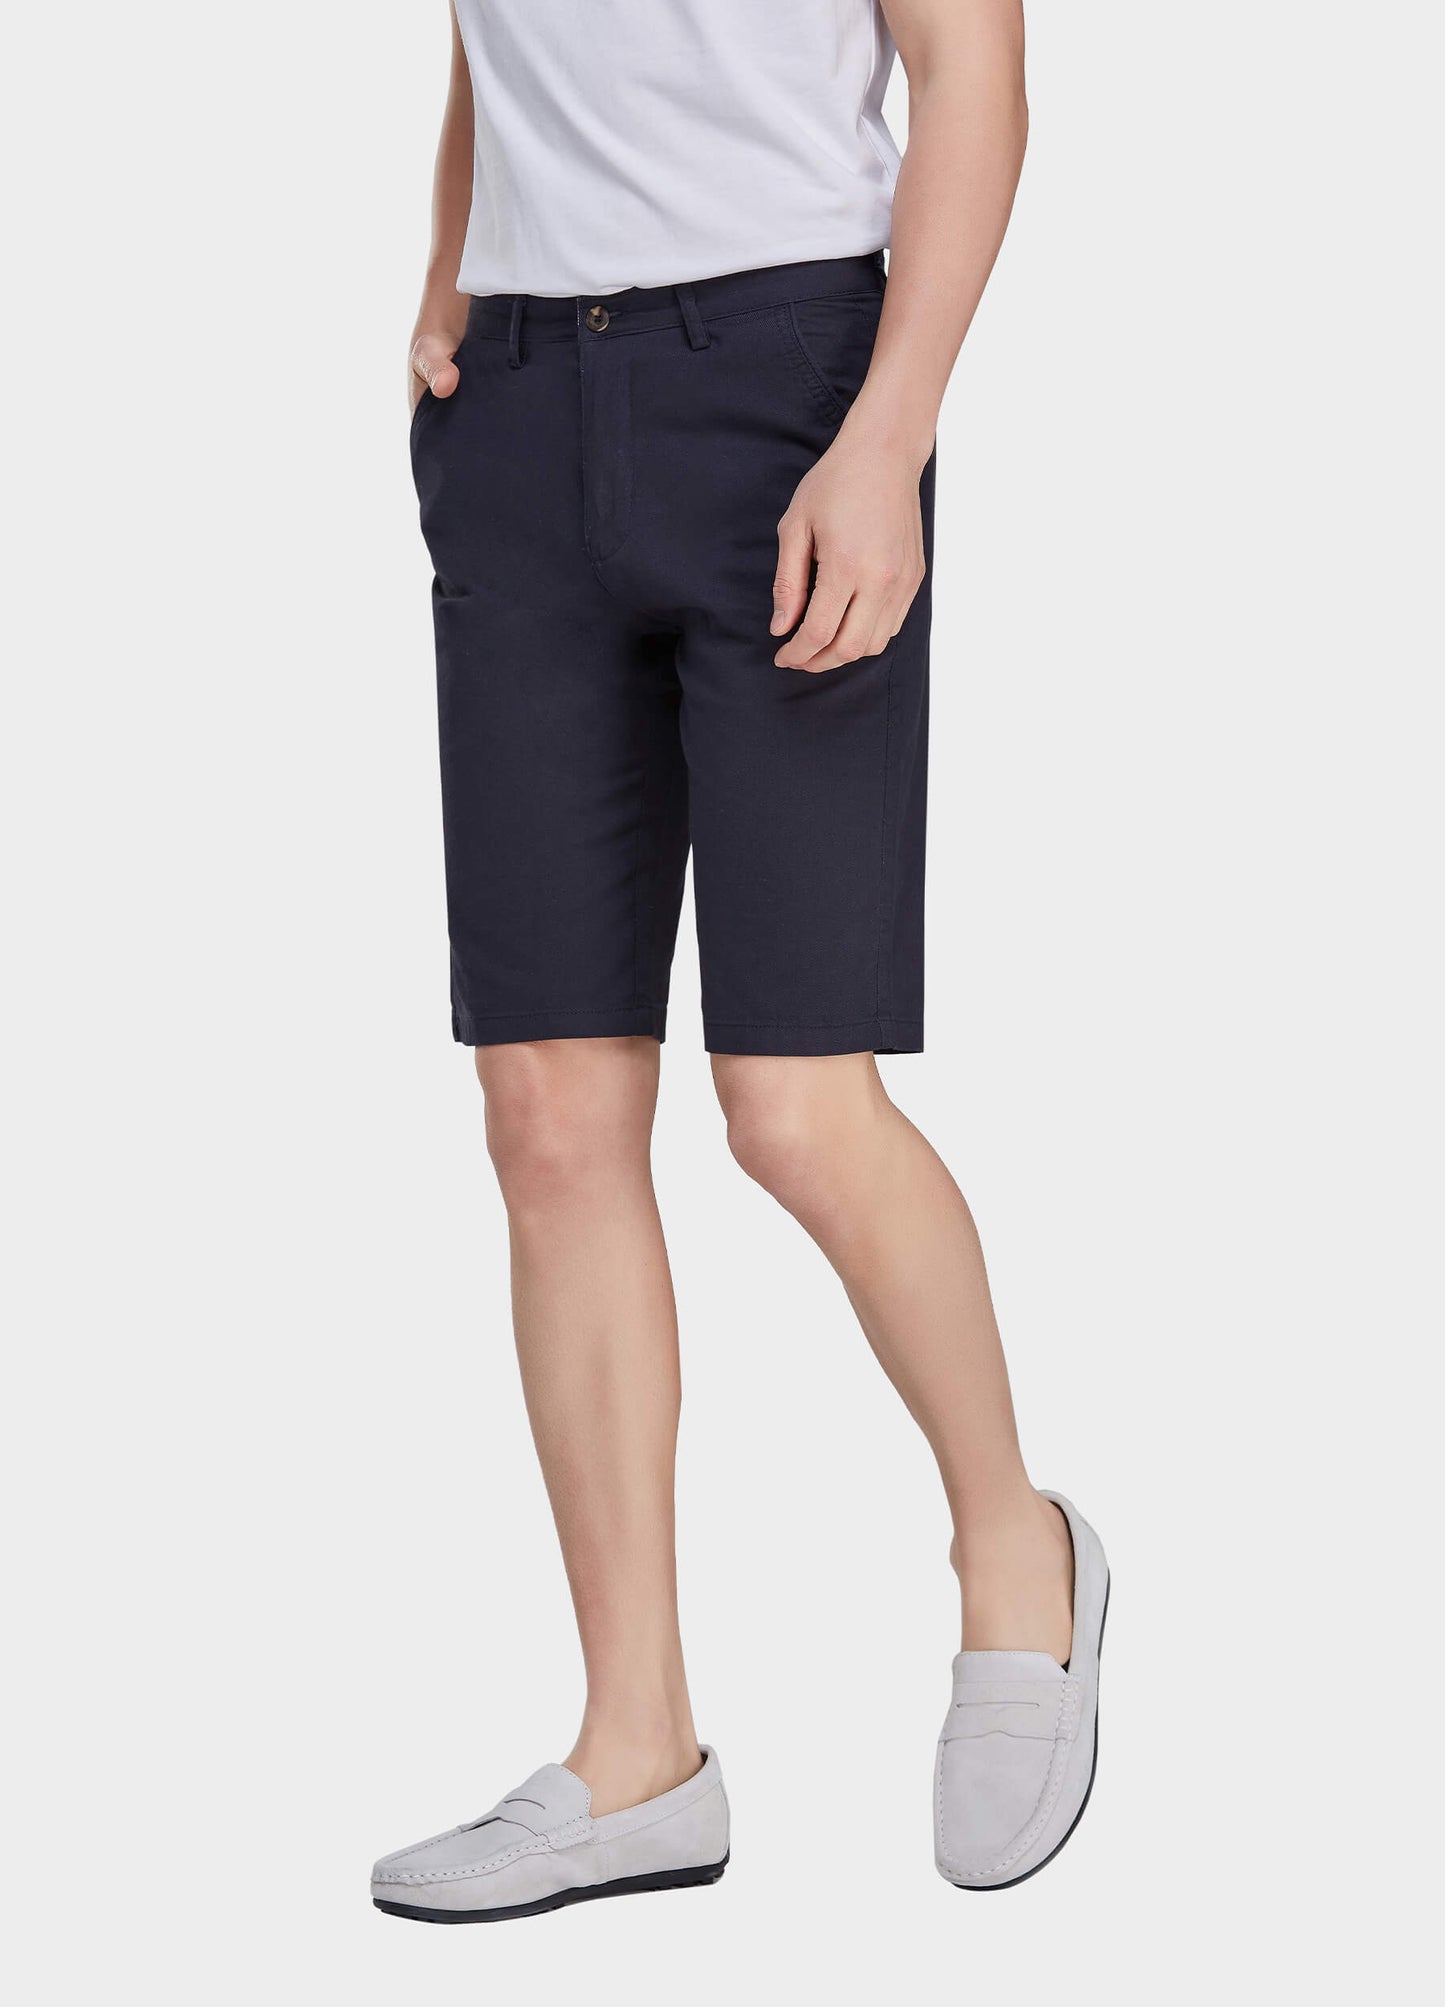 Men's Casual Zipper Fly Button Solid Shorts with Slant Pocket-Navy Blue